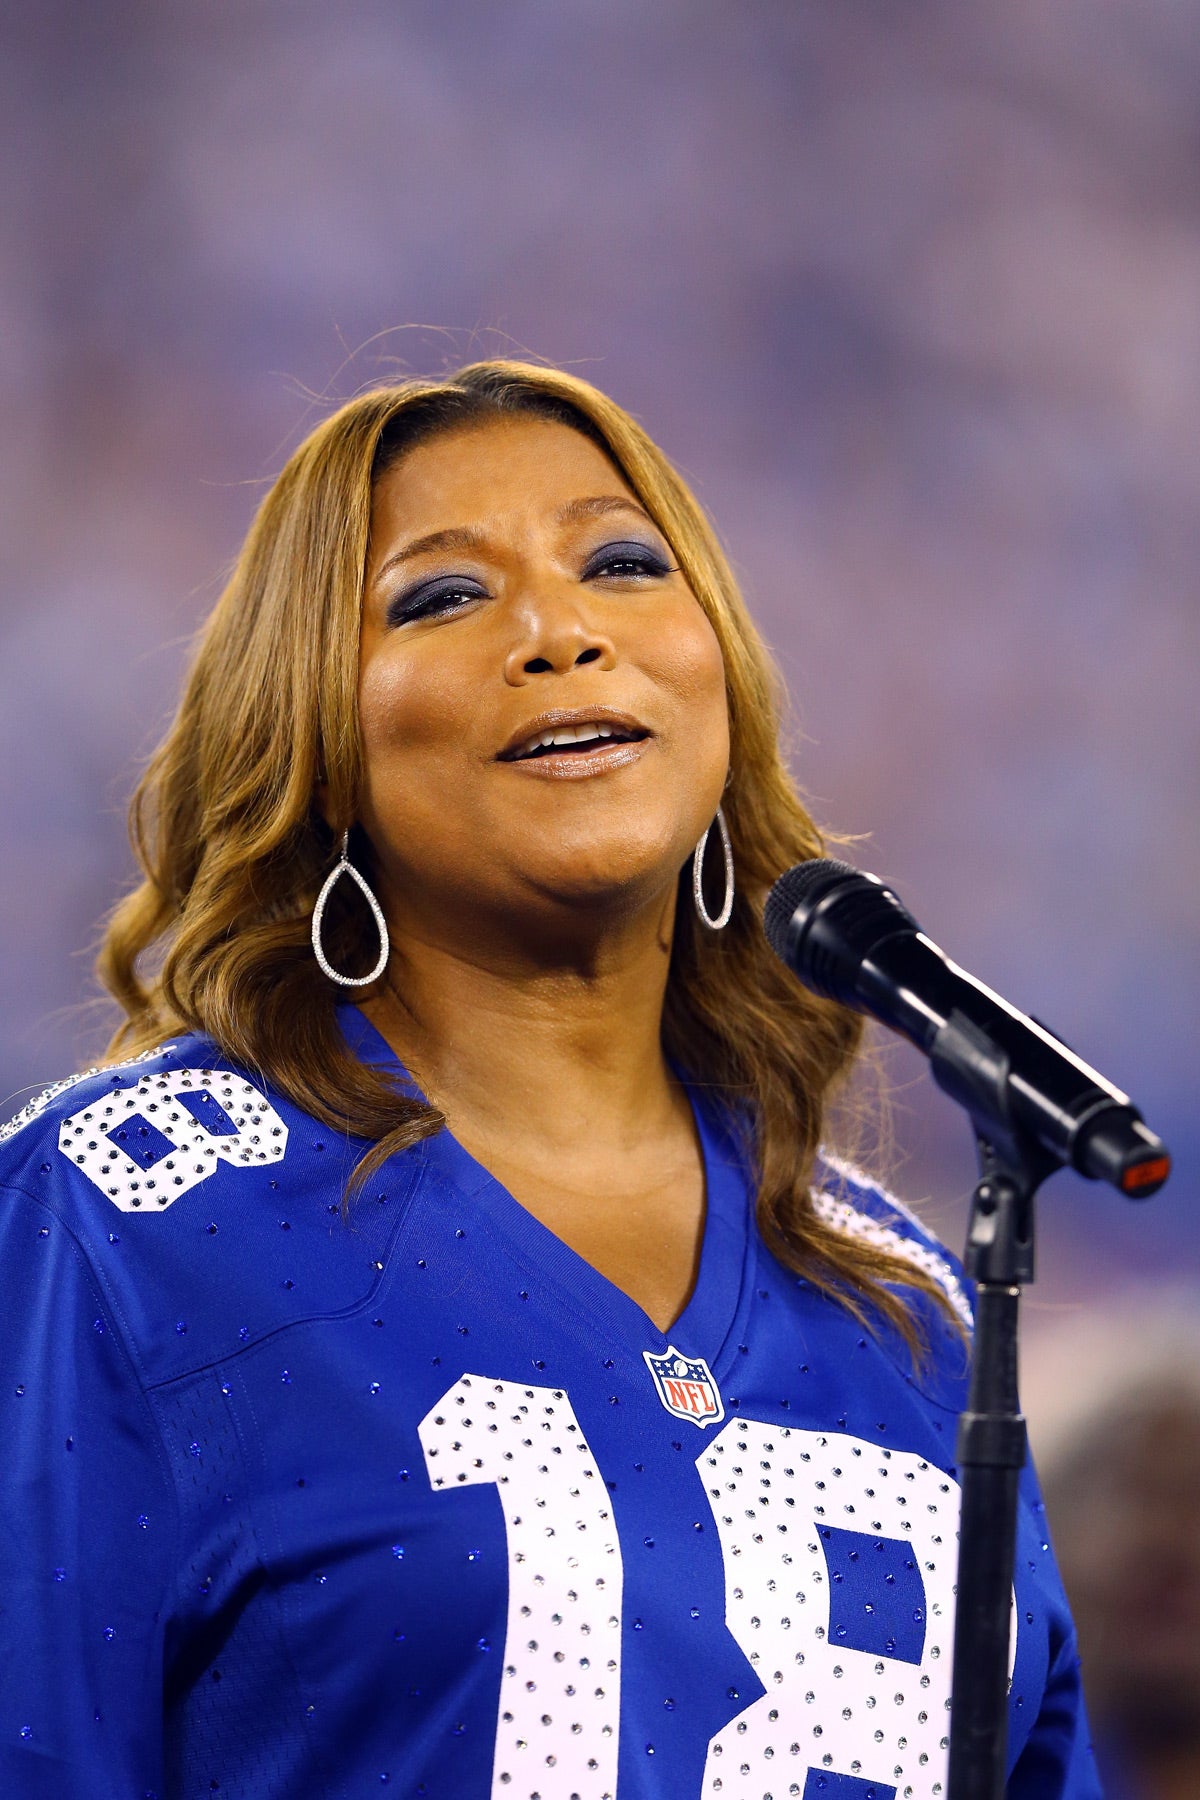 Check Out Queen Latifah's Rendition of the National Anthem